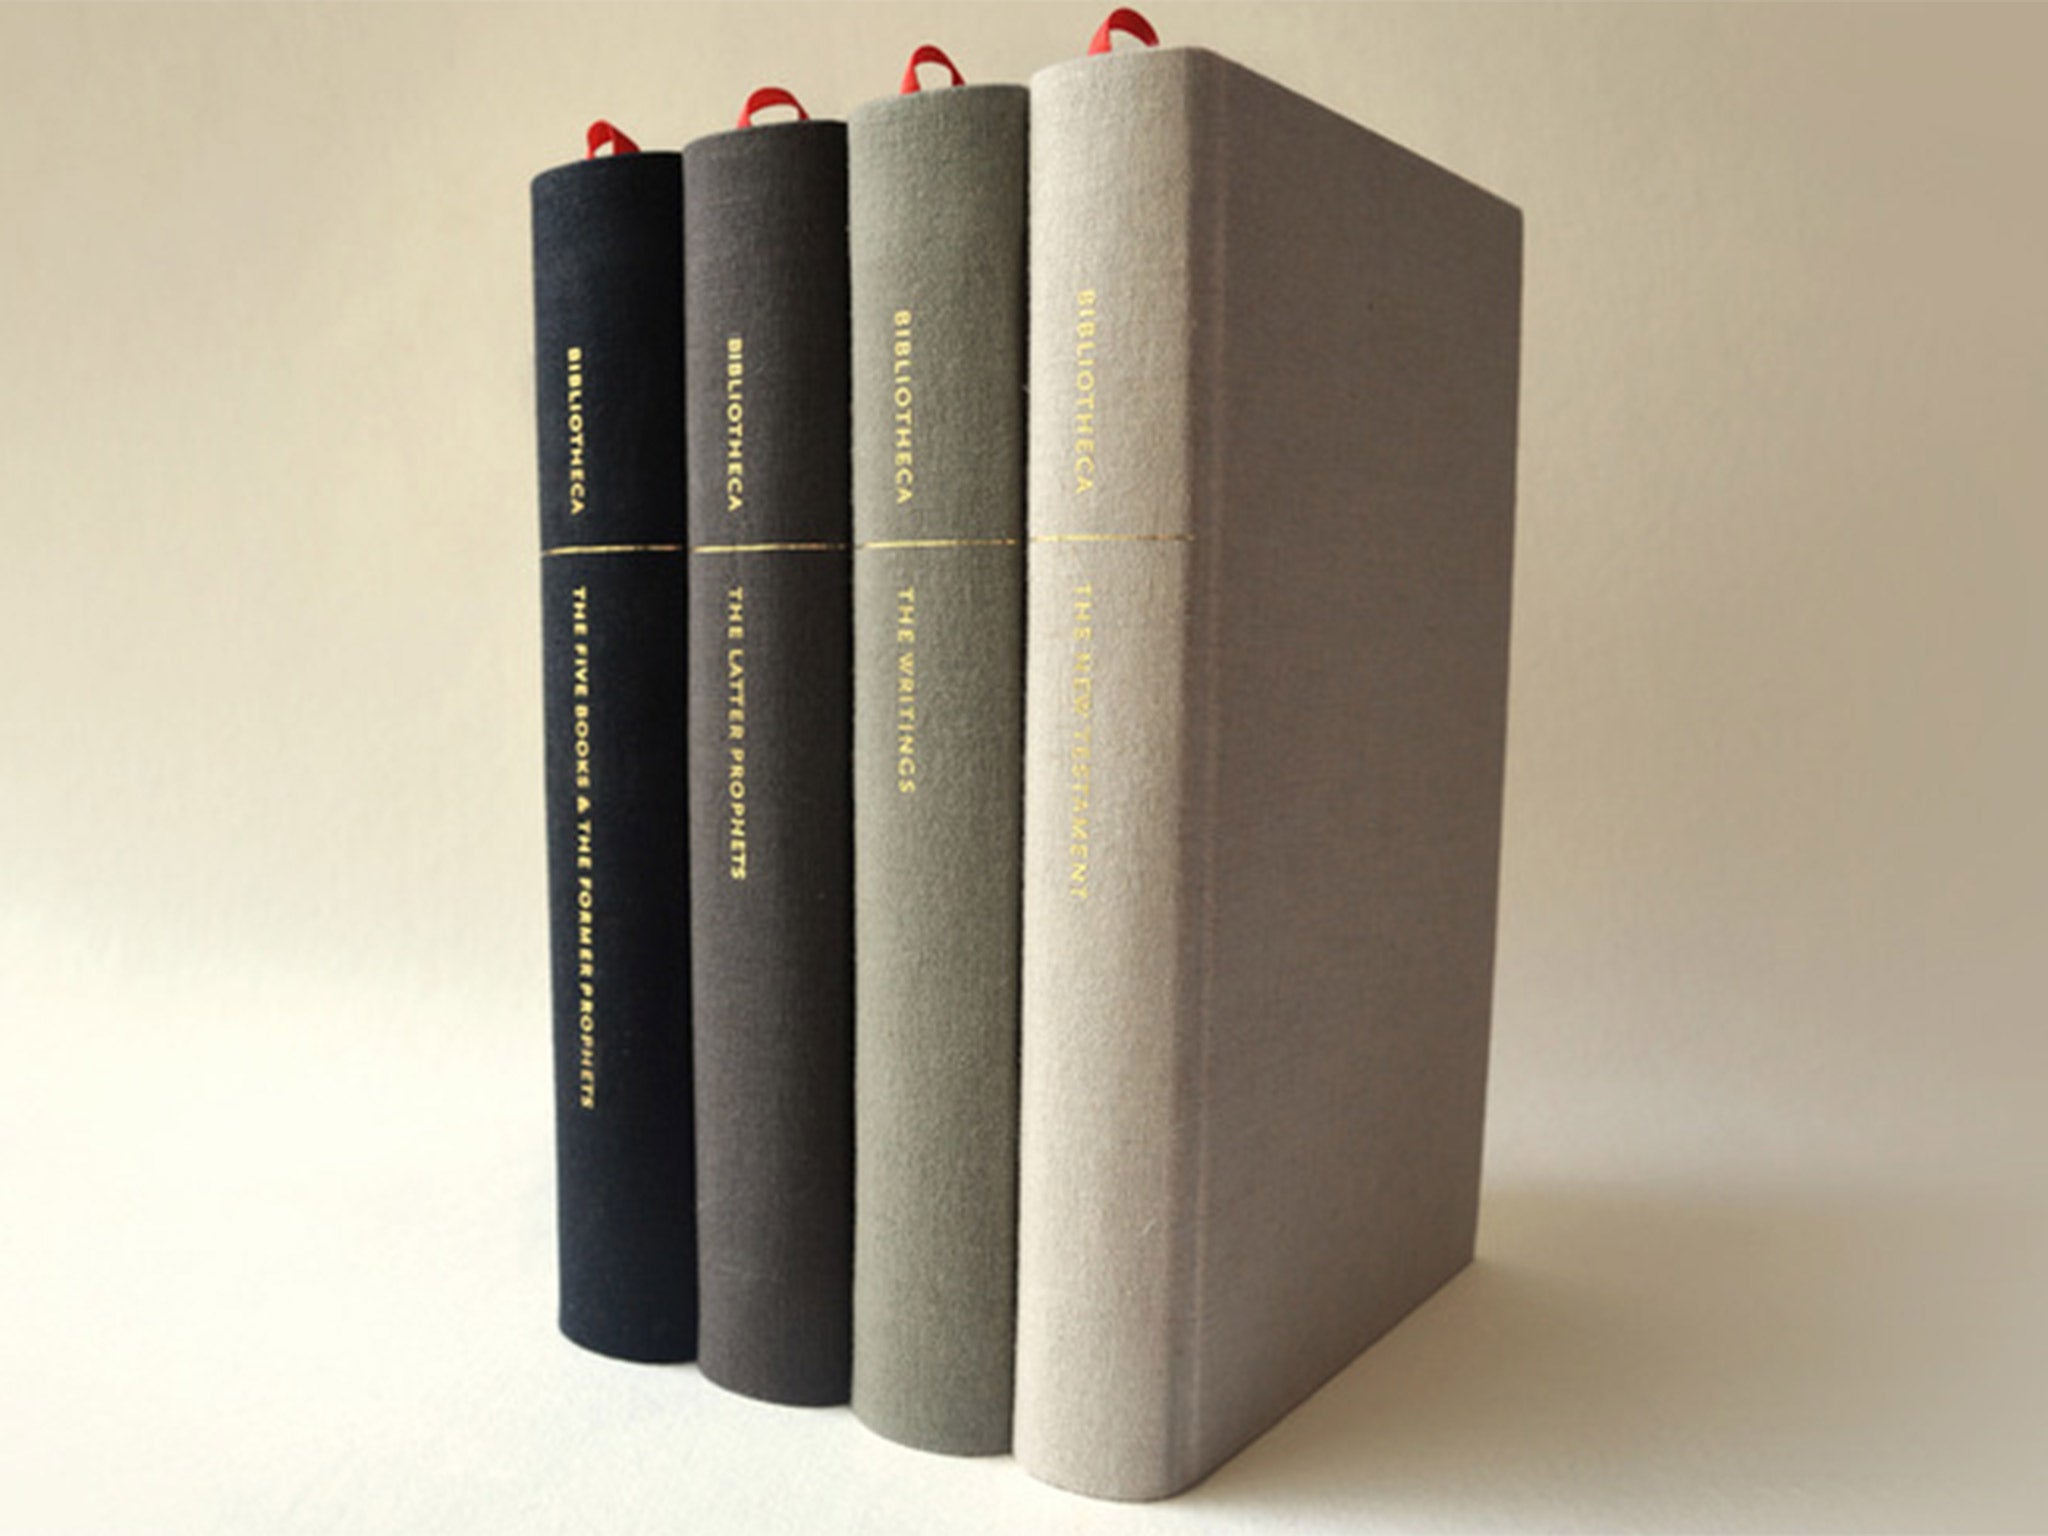 The four-volume Bibliotheca has been designed to read like a 'great literary anthology'